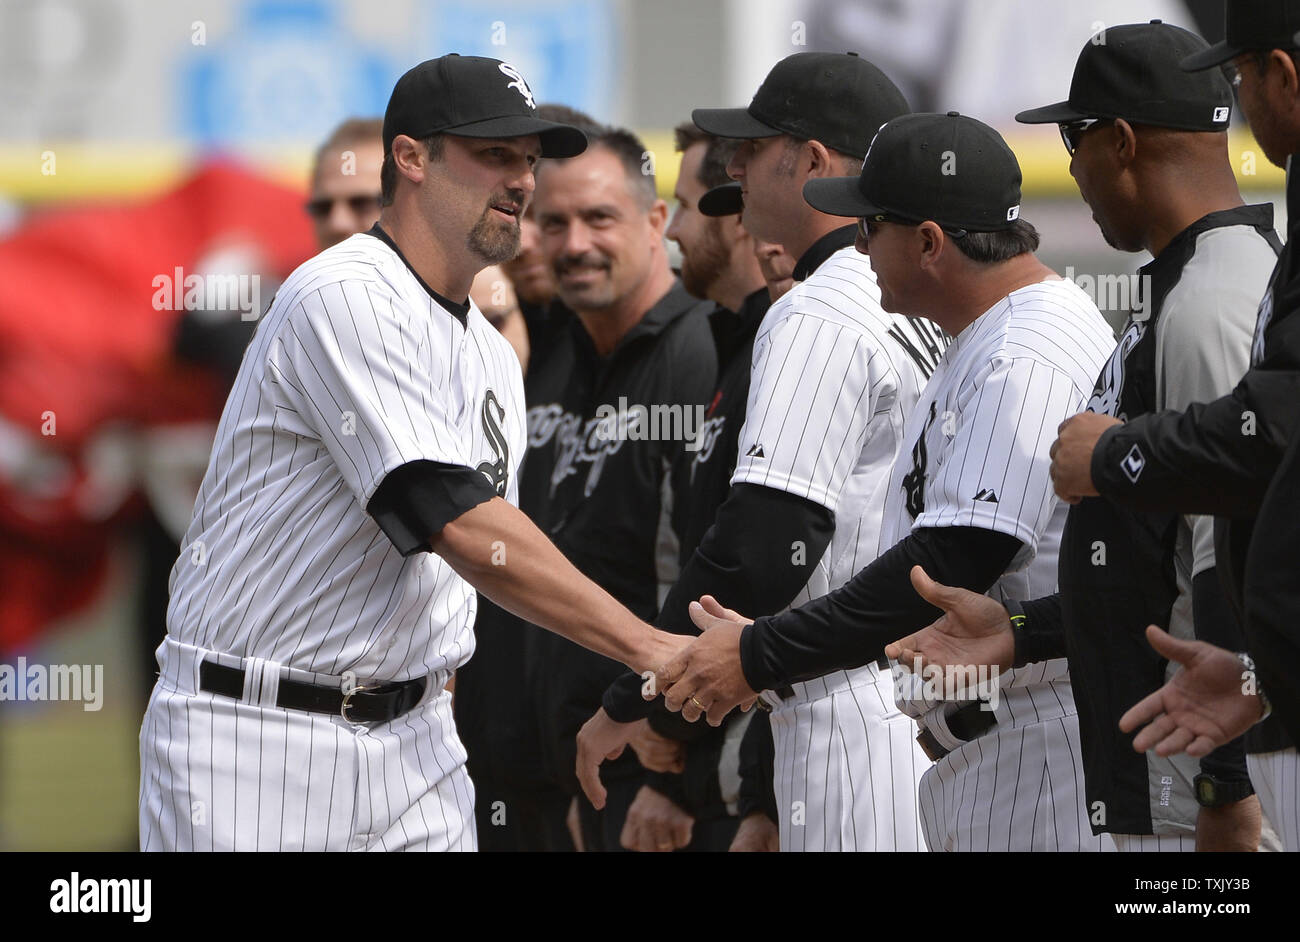 Jake Peavy, Adam Dunn lead White Sox past Cubs 6-0